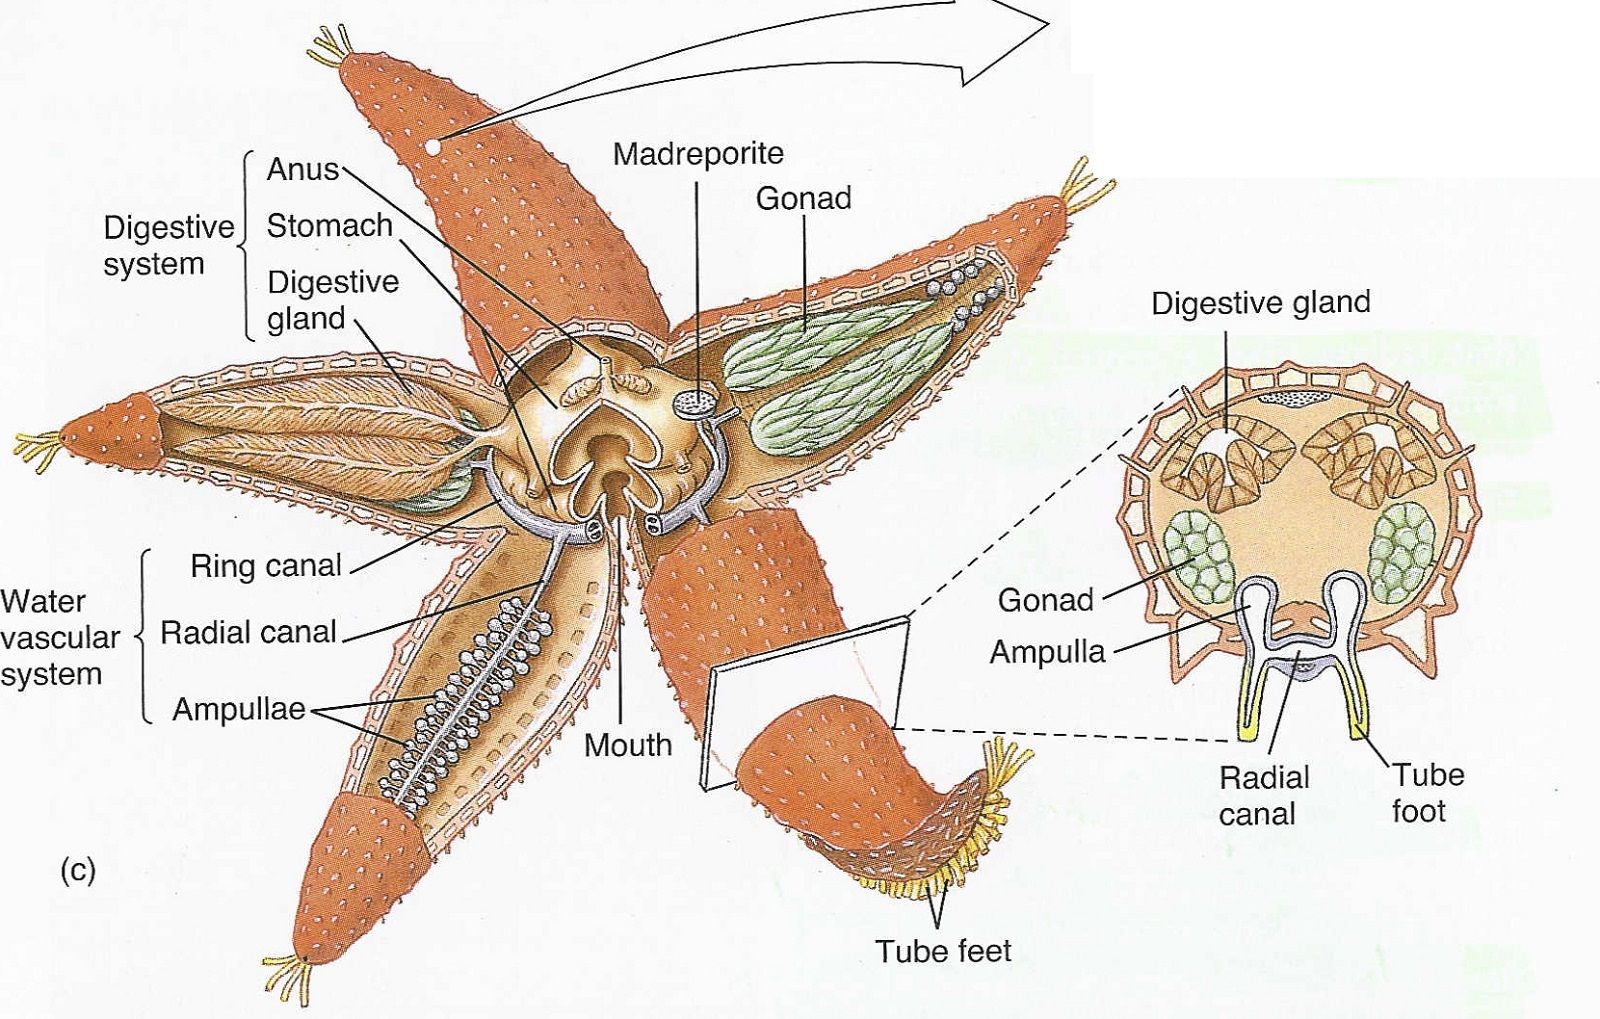 starfish-labelled-diagram-wiring-diagram-pictures